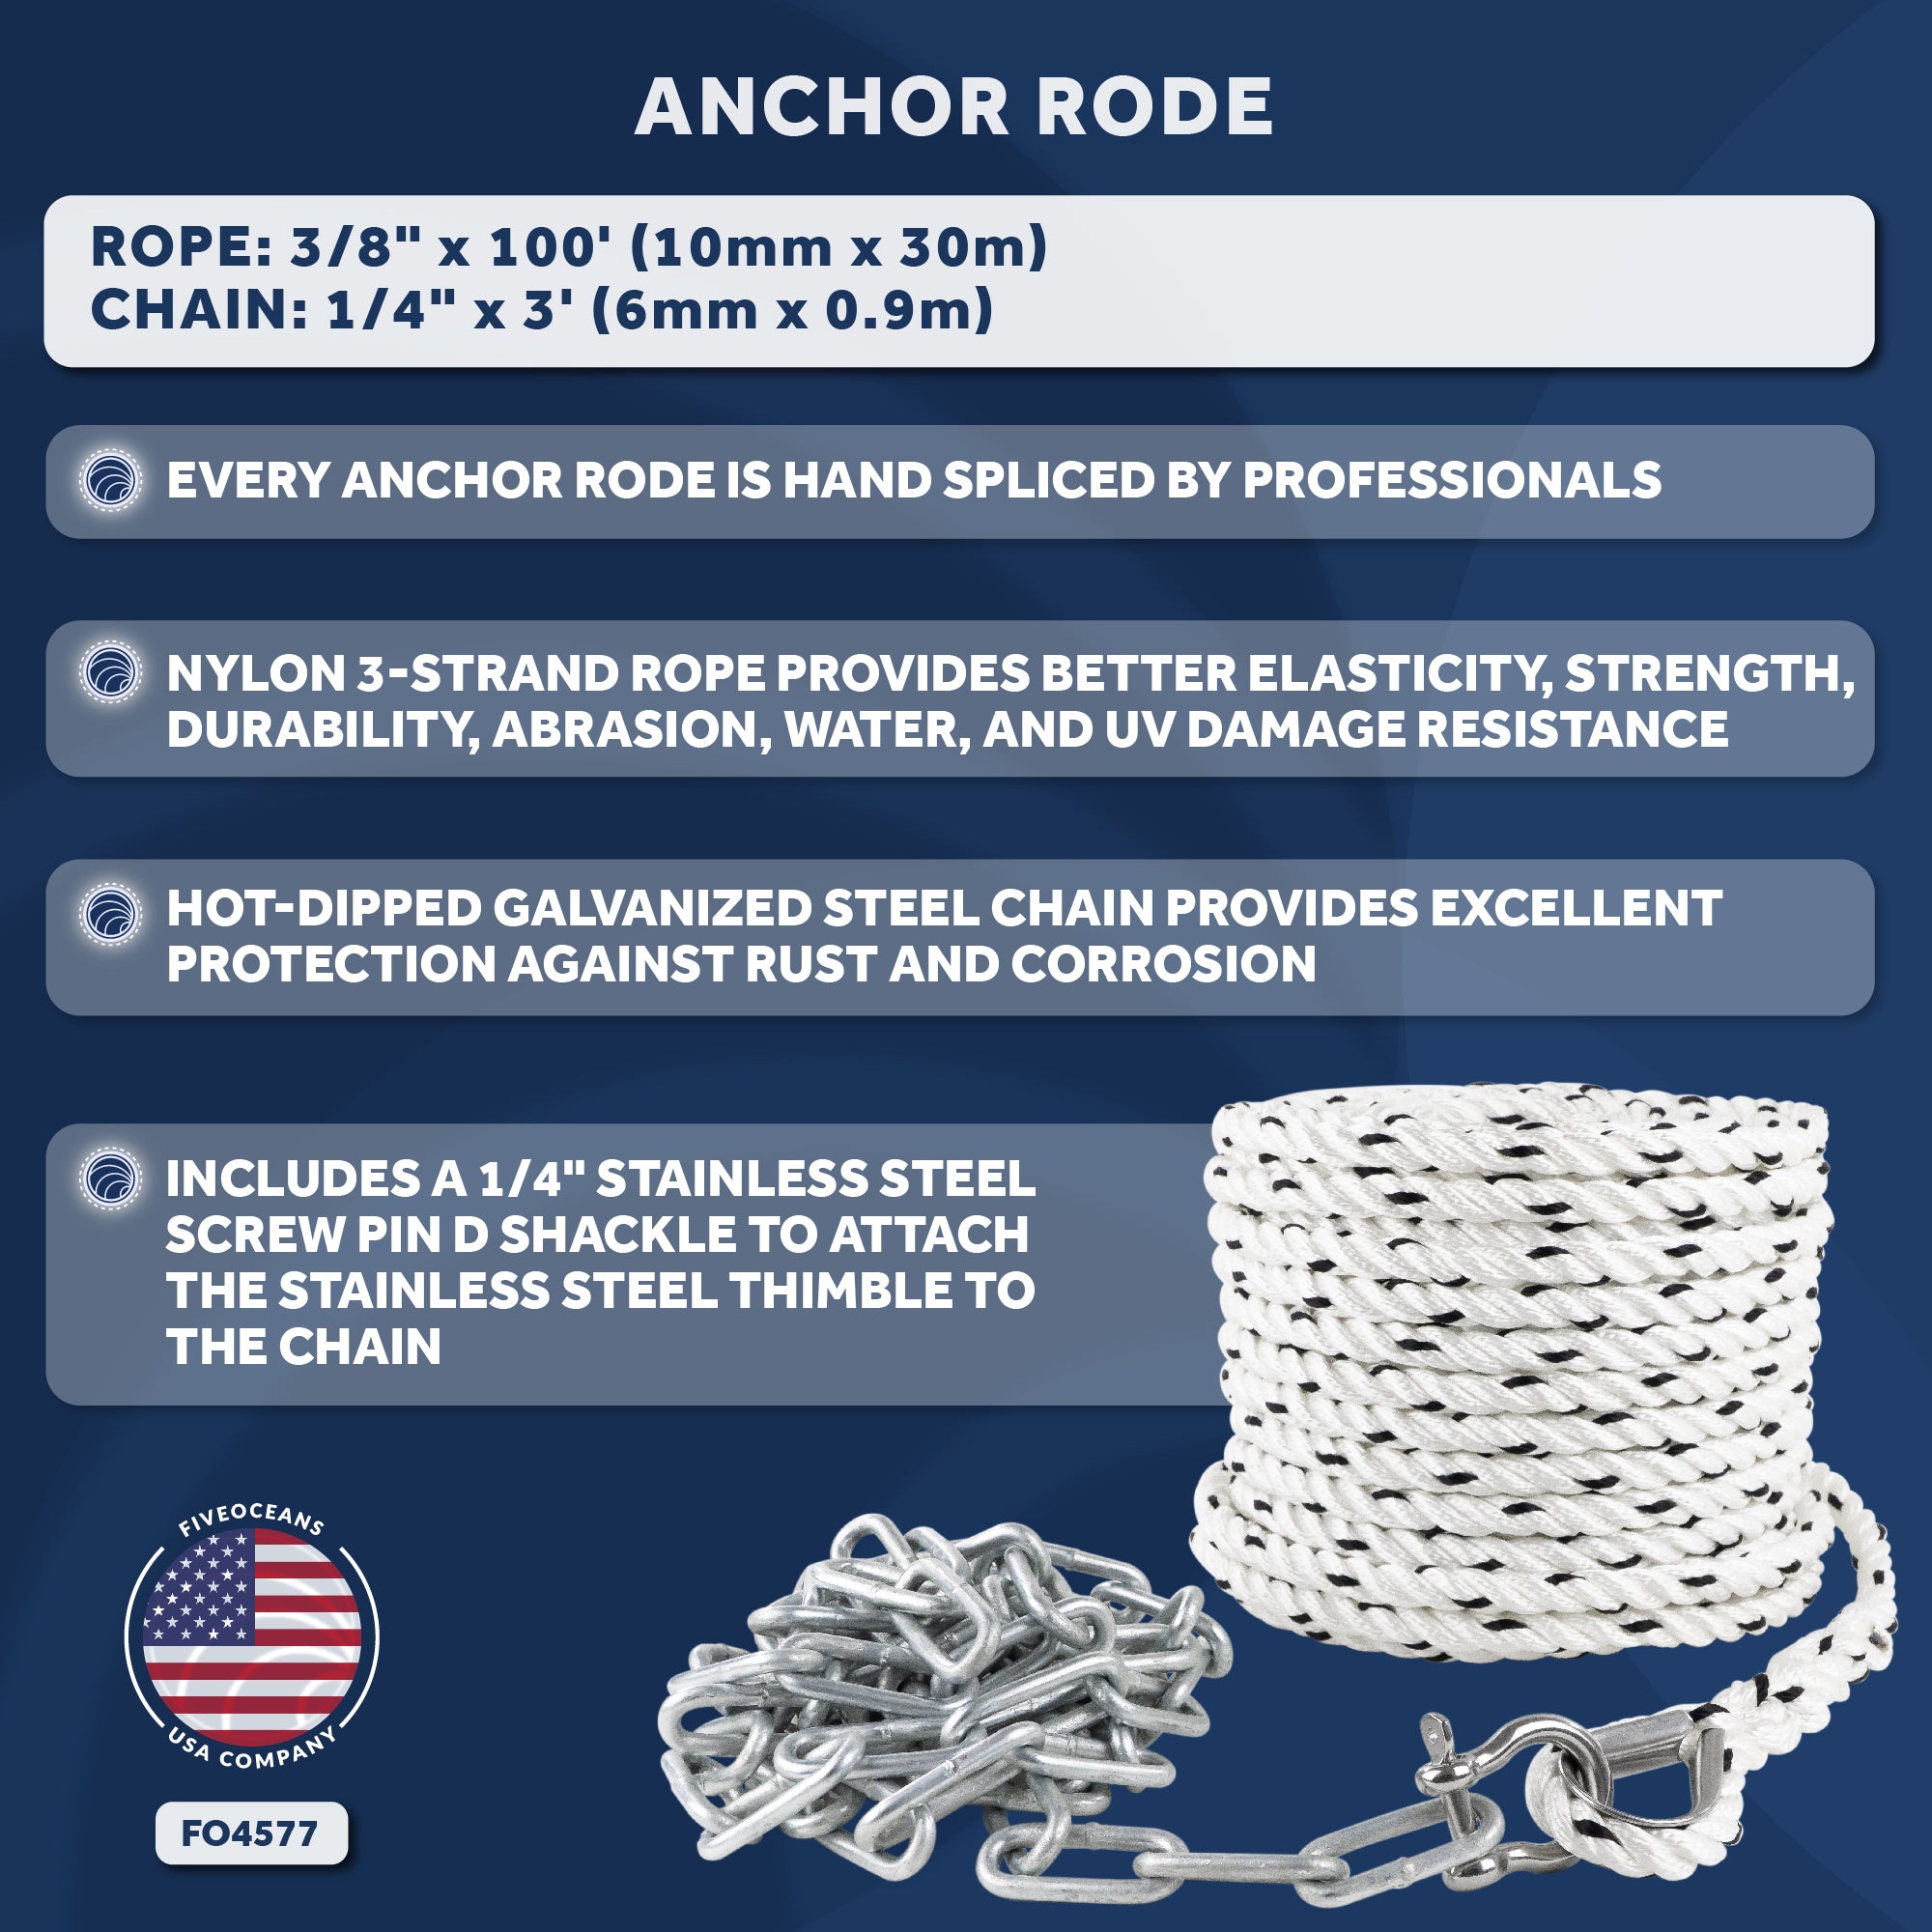 Anchor Rode, 3/8" x 100' Nylon 3-Strand Rope, 1/4" x 3' Hot Dipped Galvanized Steel Chain - FO4577